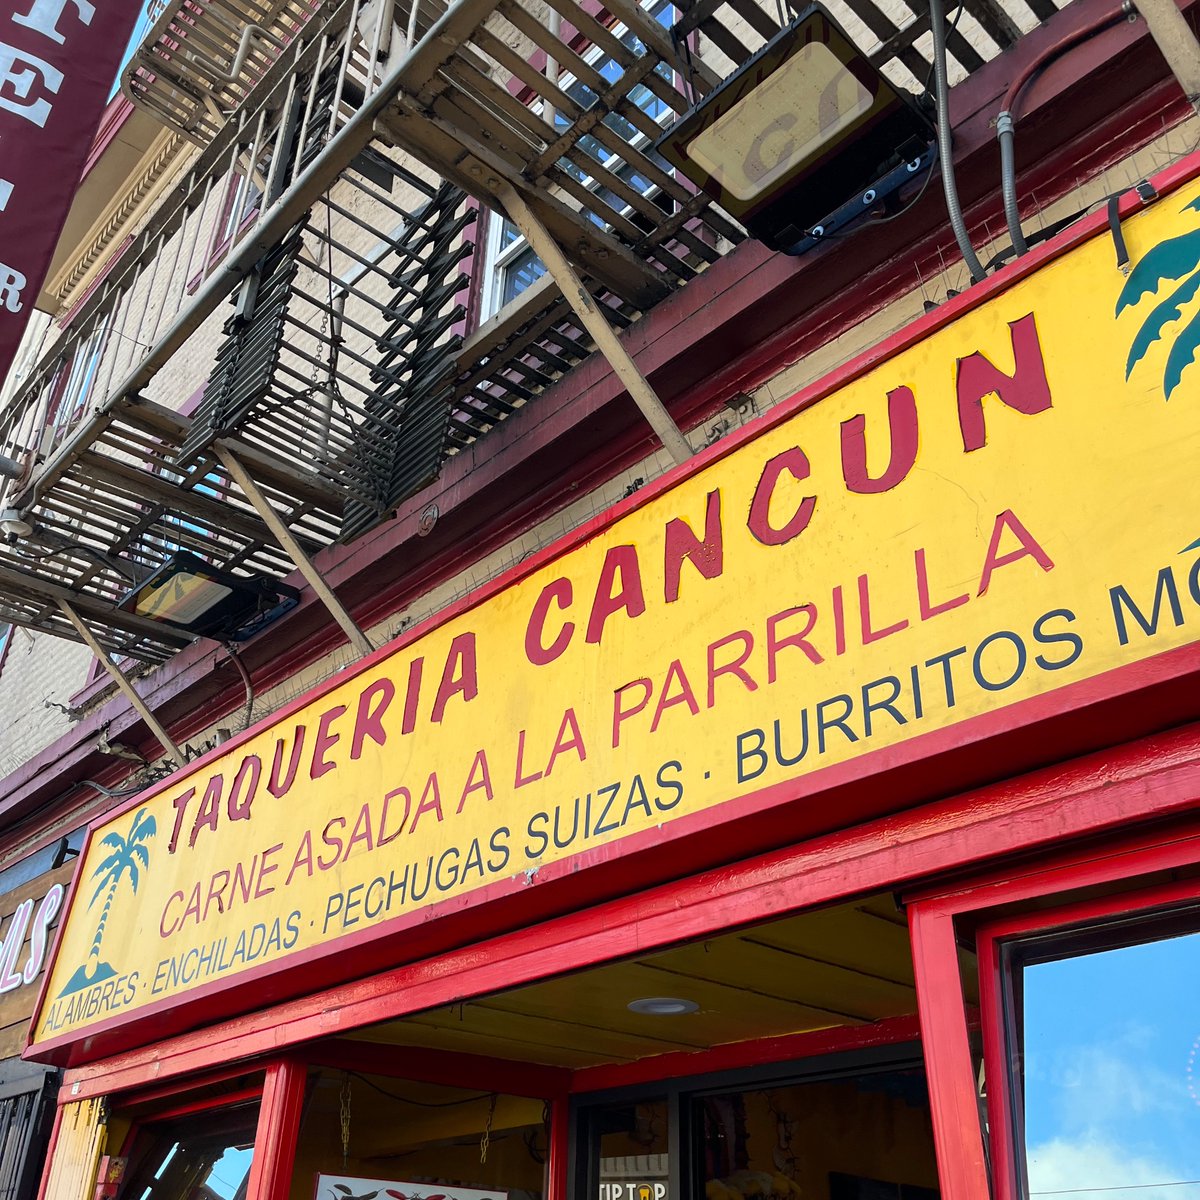 Now that the end of the #TotalSF podcast is near, it’s time we all acknowledge that the best place to get a burrito in S.F. is, objectively, Taqueria Cancun on Mission.